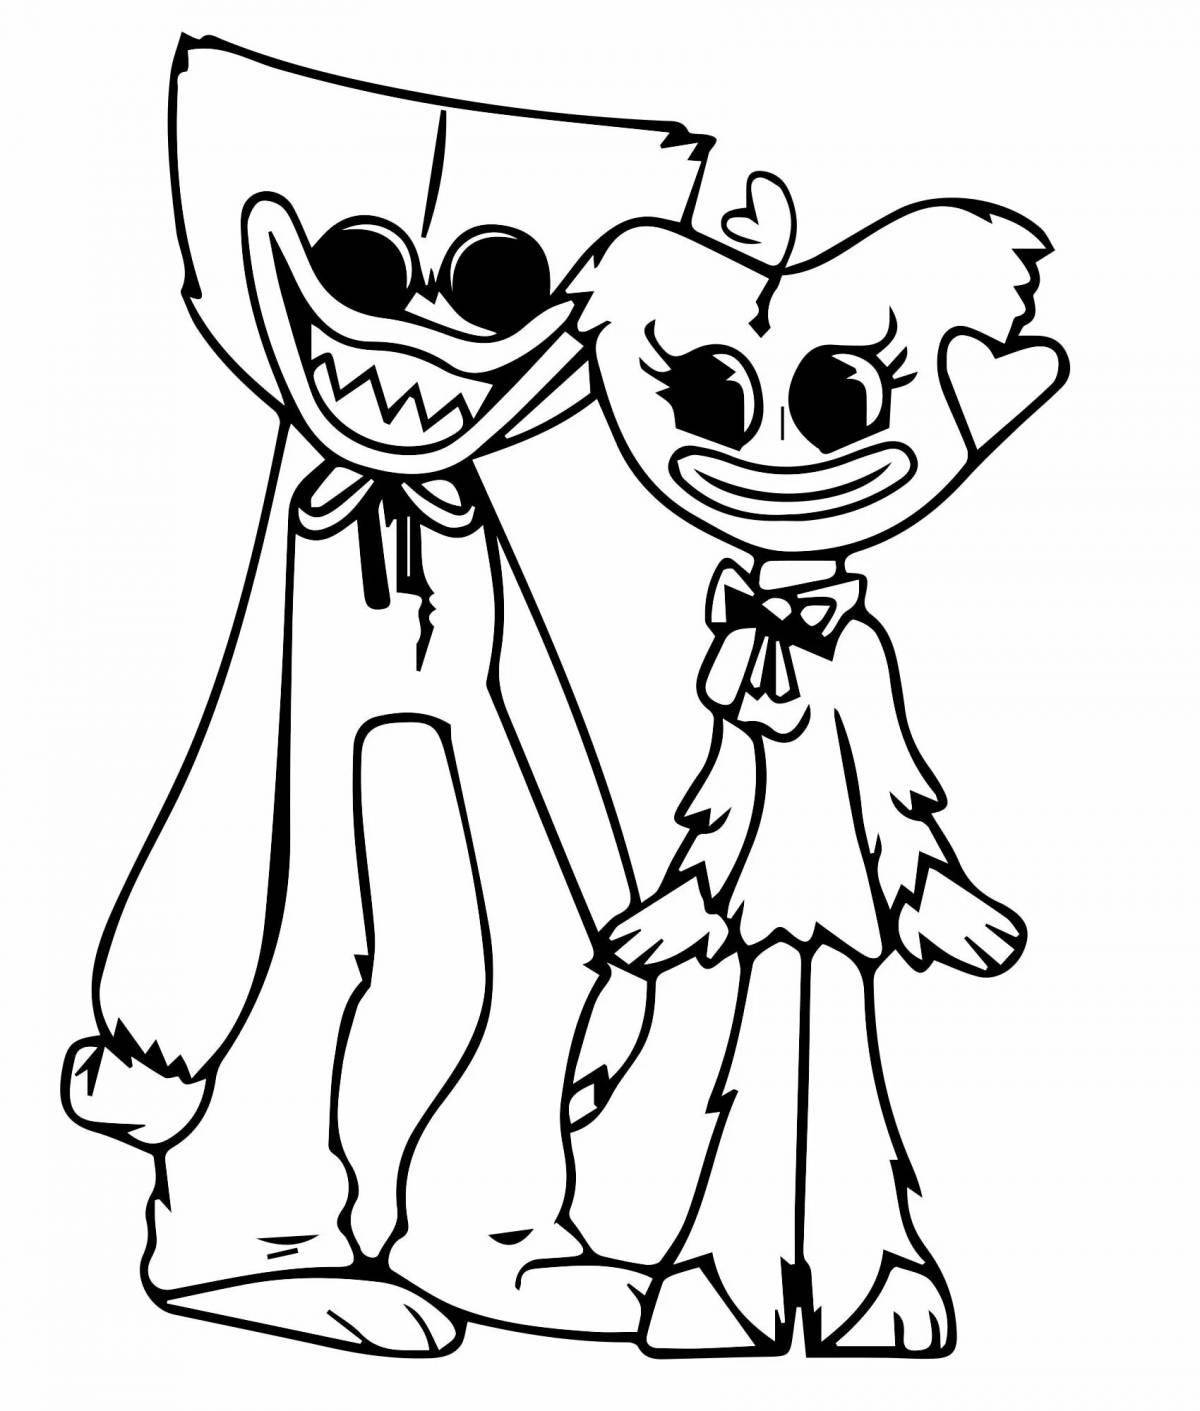 Coloring book charming haggy waggie and kisi misi